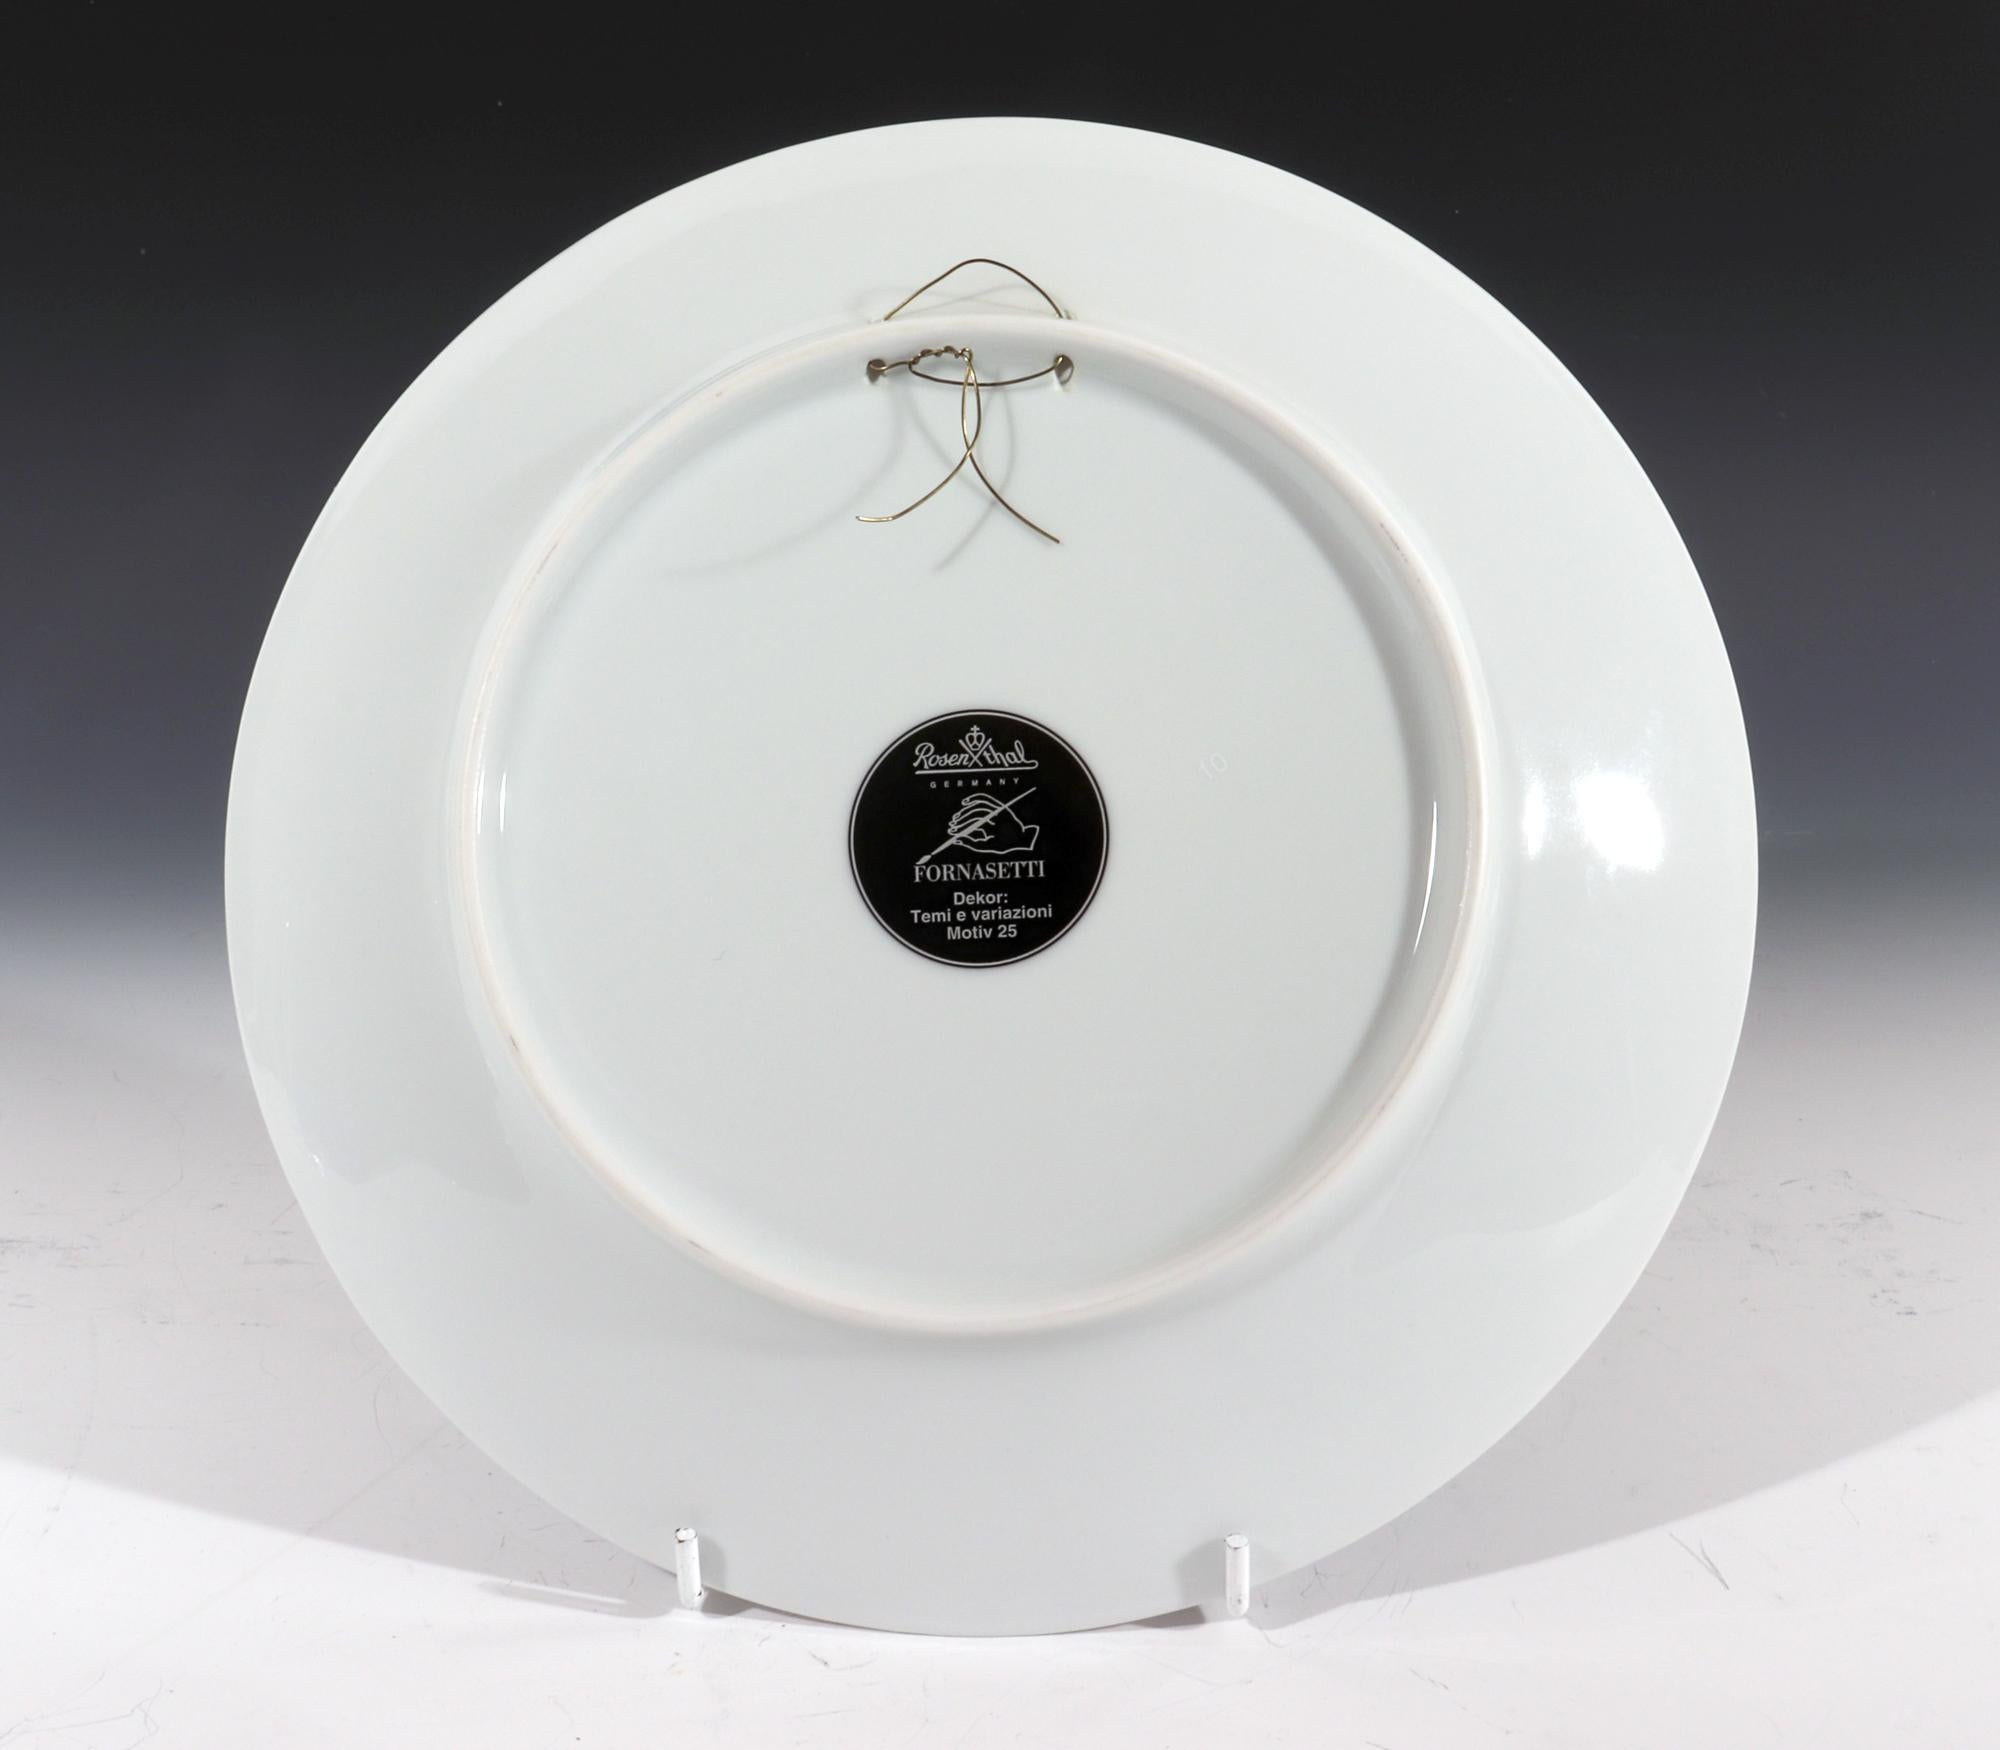 Piero Fornasetti Rosenthal Porcelain Themes and Variations Plate, Motiv 25 In Good Condition For Sale In Downingtown, PA